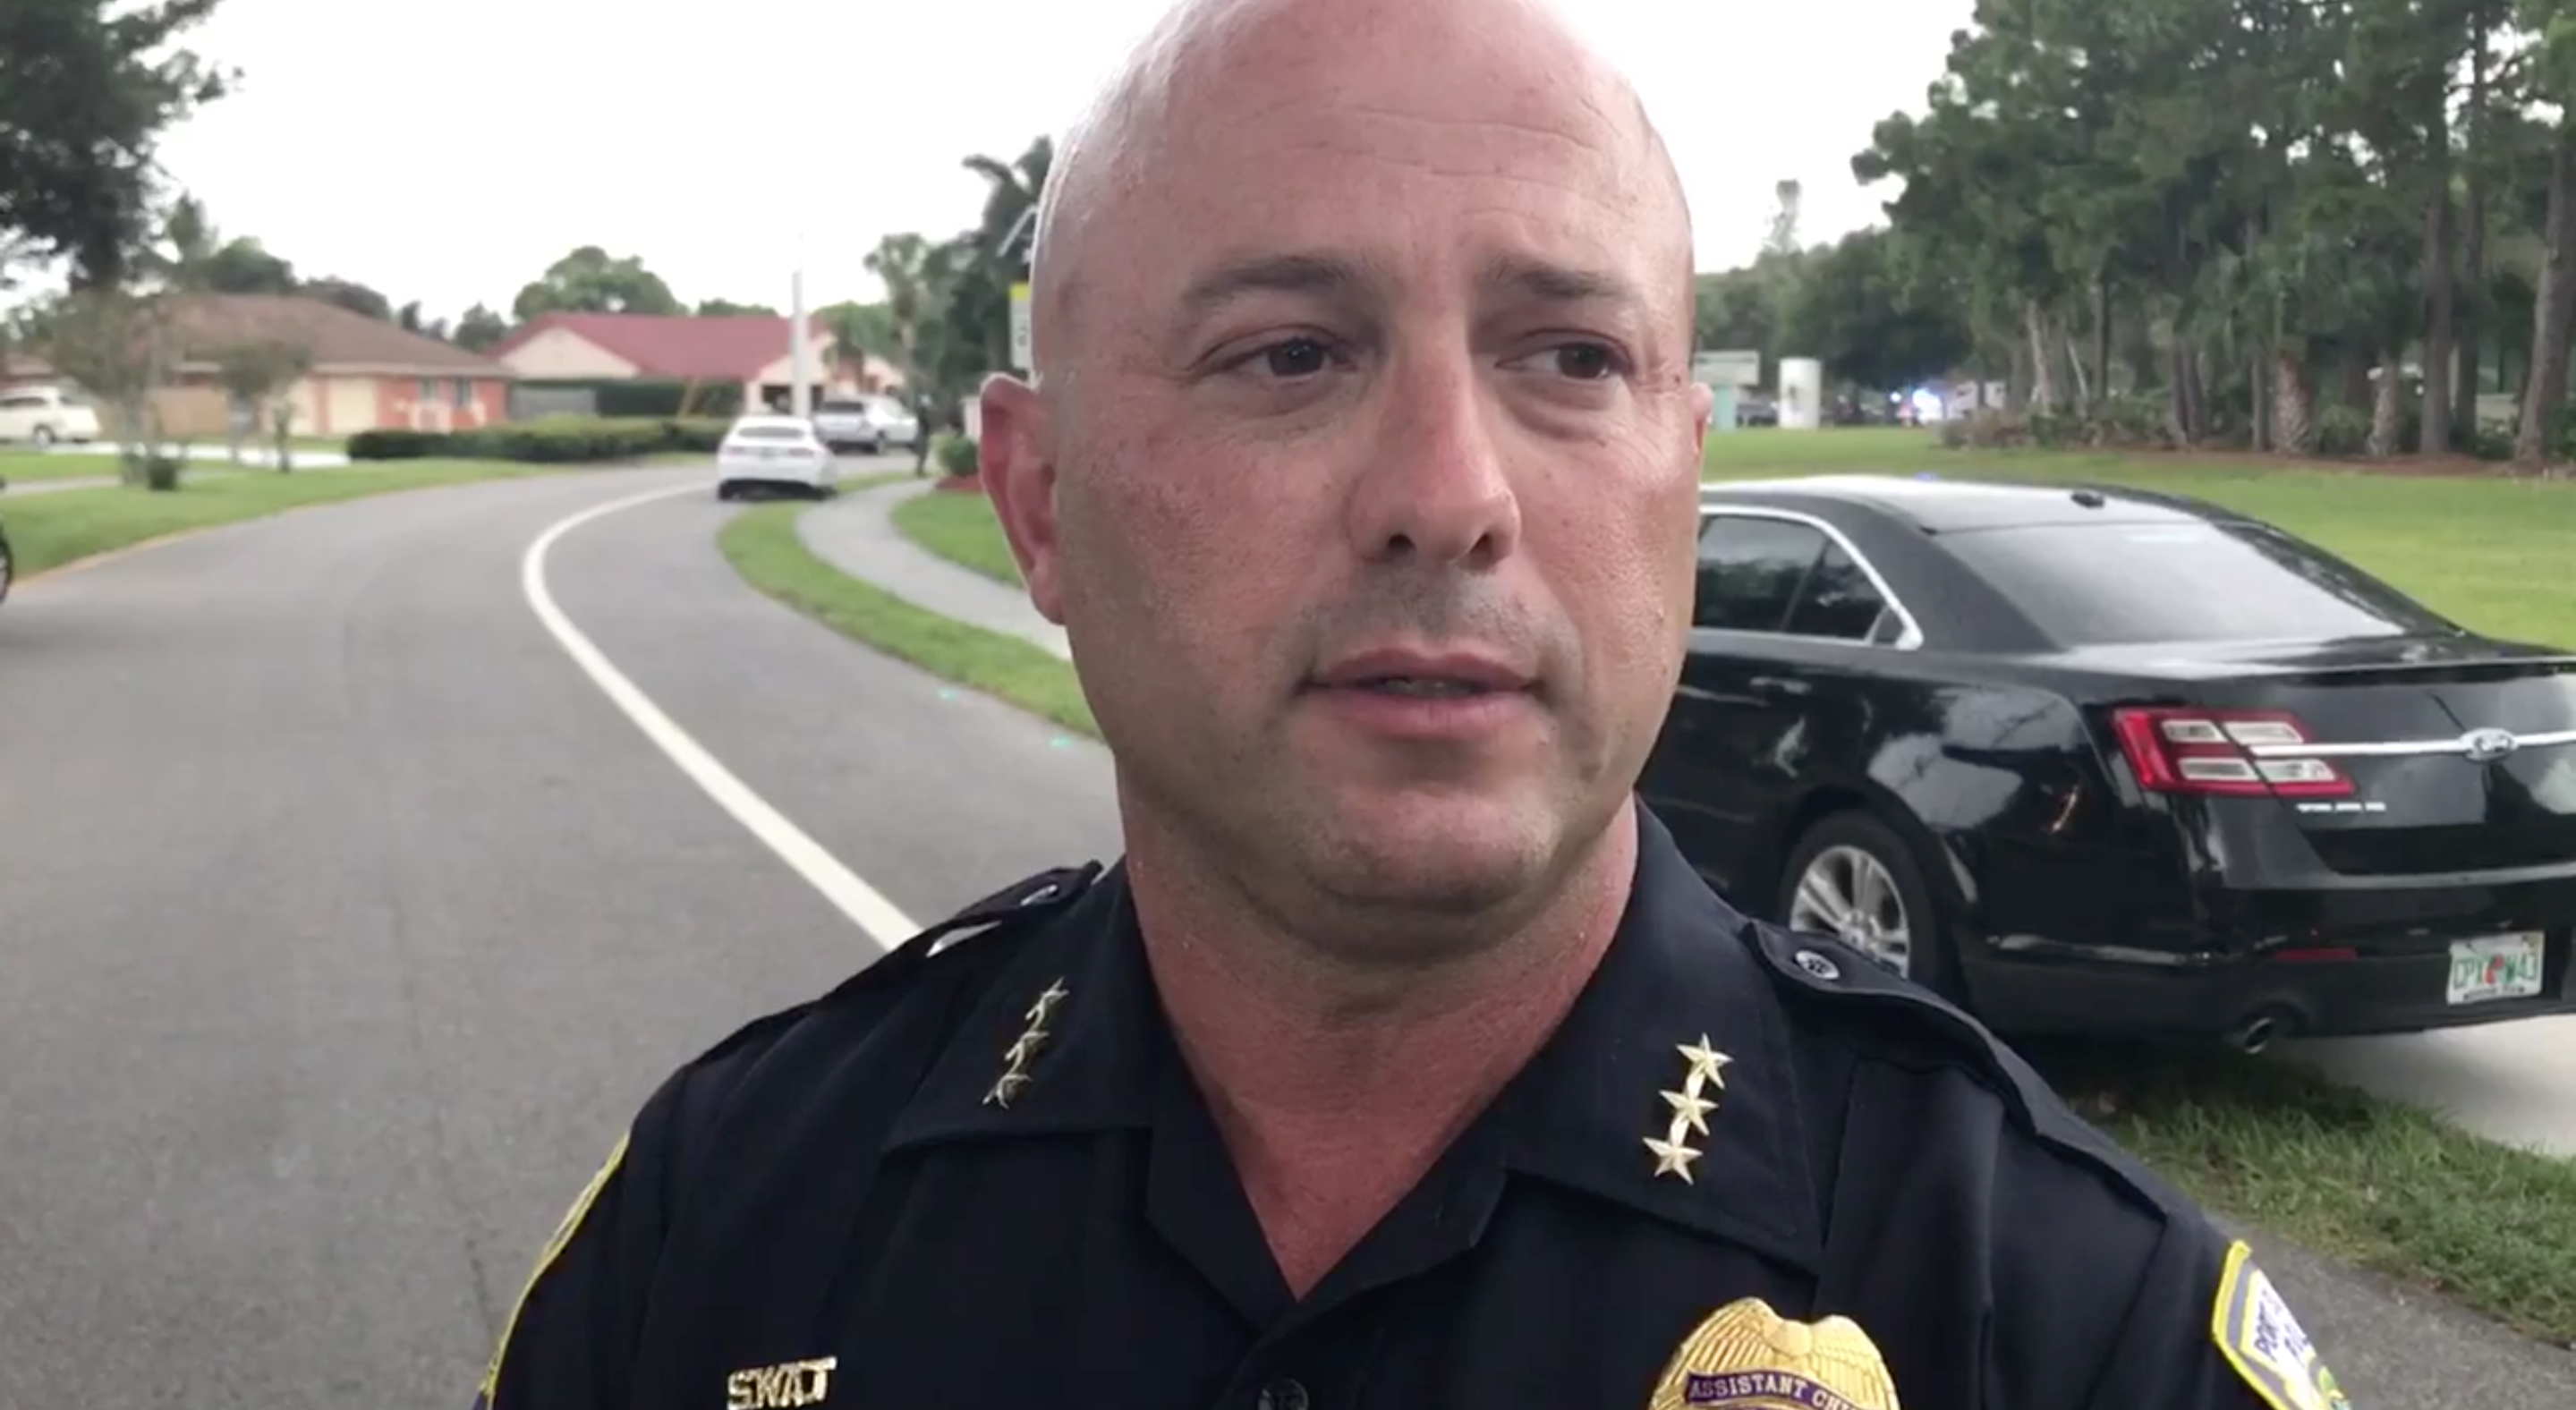 Port St. Lucie Assistant Police Chief Richard Del Toro talks to the press following the killing of an 11-year-old girl and her father over a dispute involving a dog. (Photo: Treasure Coast Palm/Screenshot)